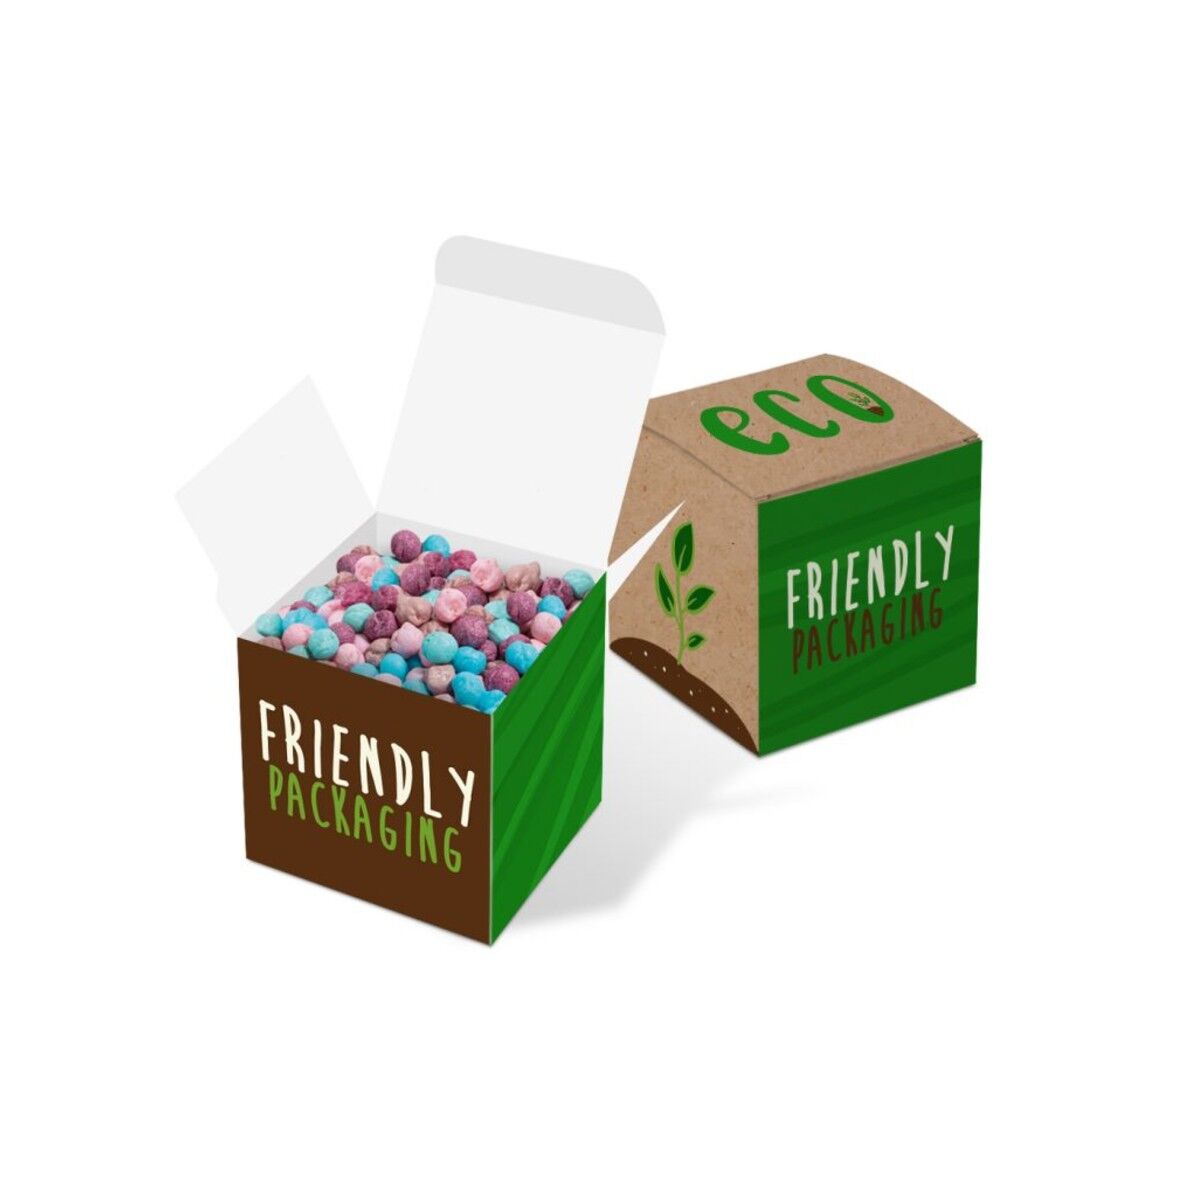 Biodegradable Sweets Box filled with Millions